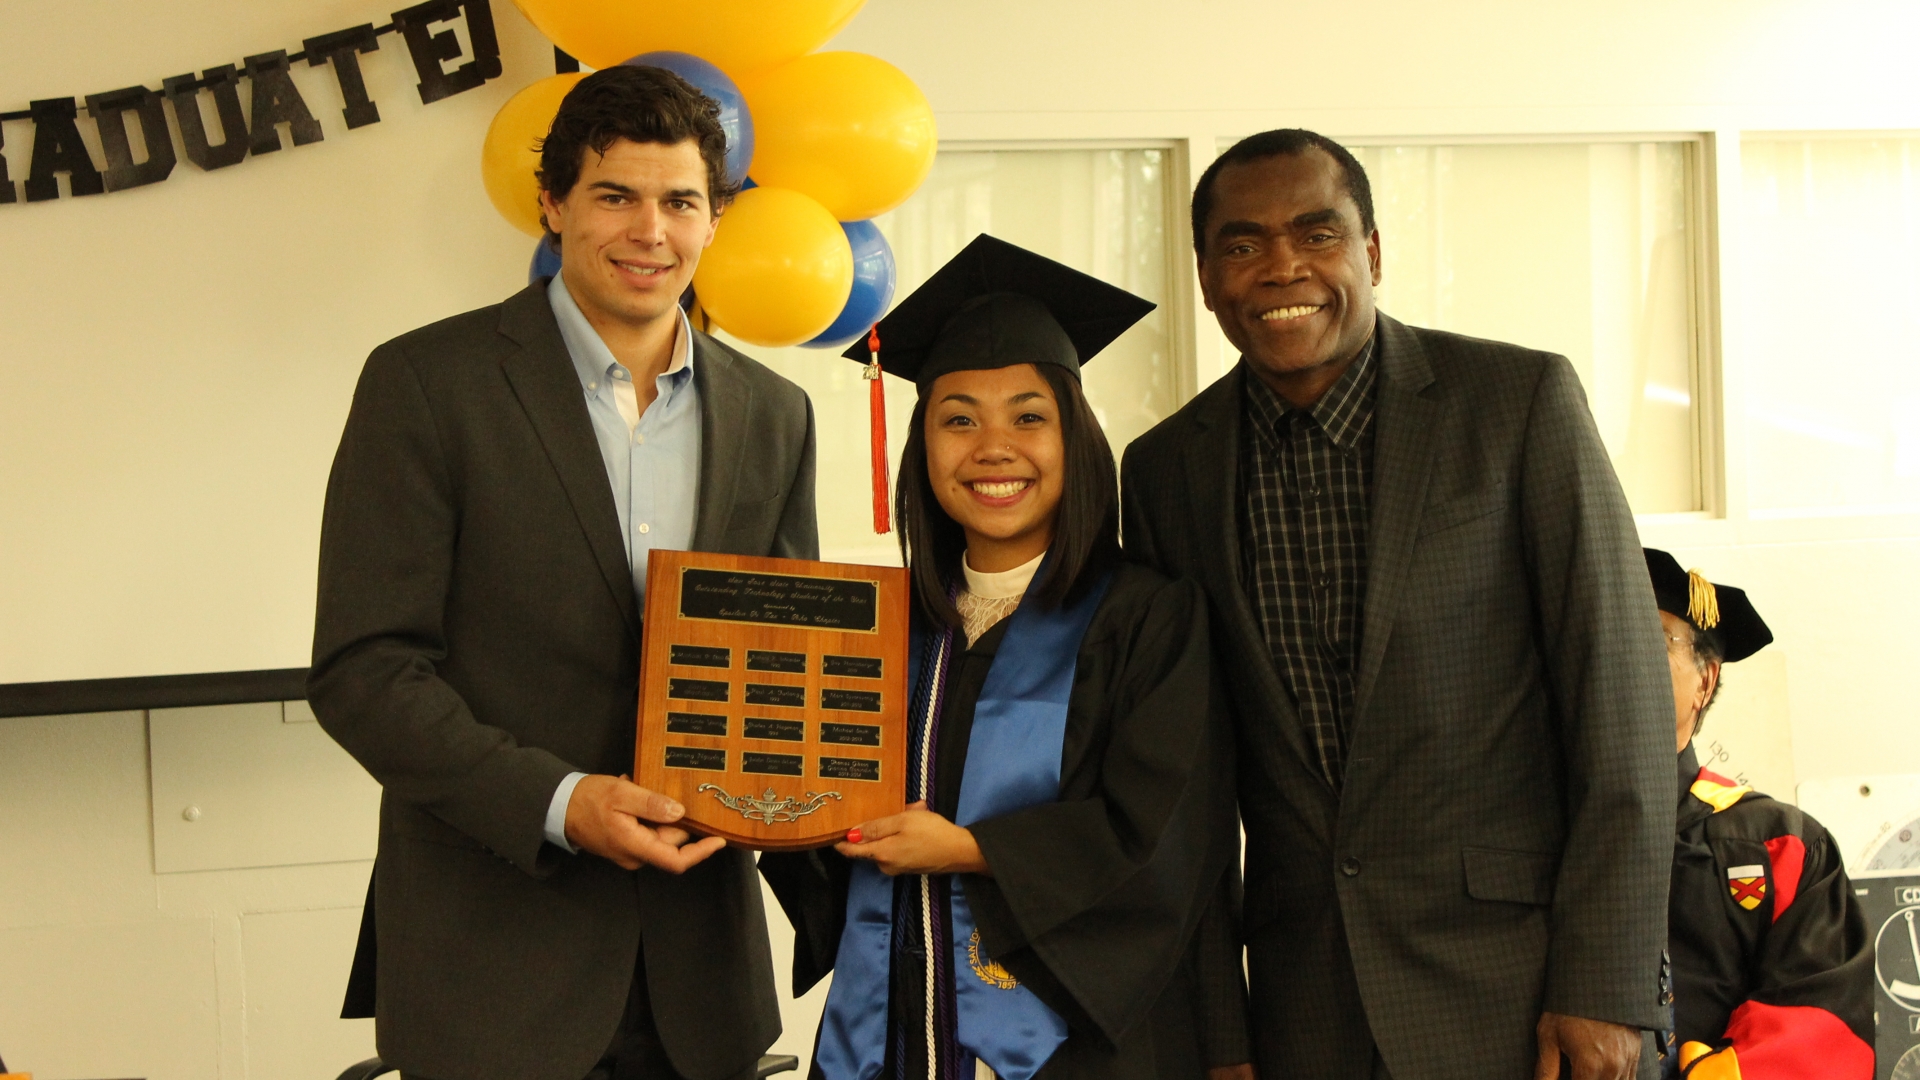 2014 Technology Students of the Year Award for Thomas and Gianina